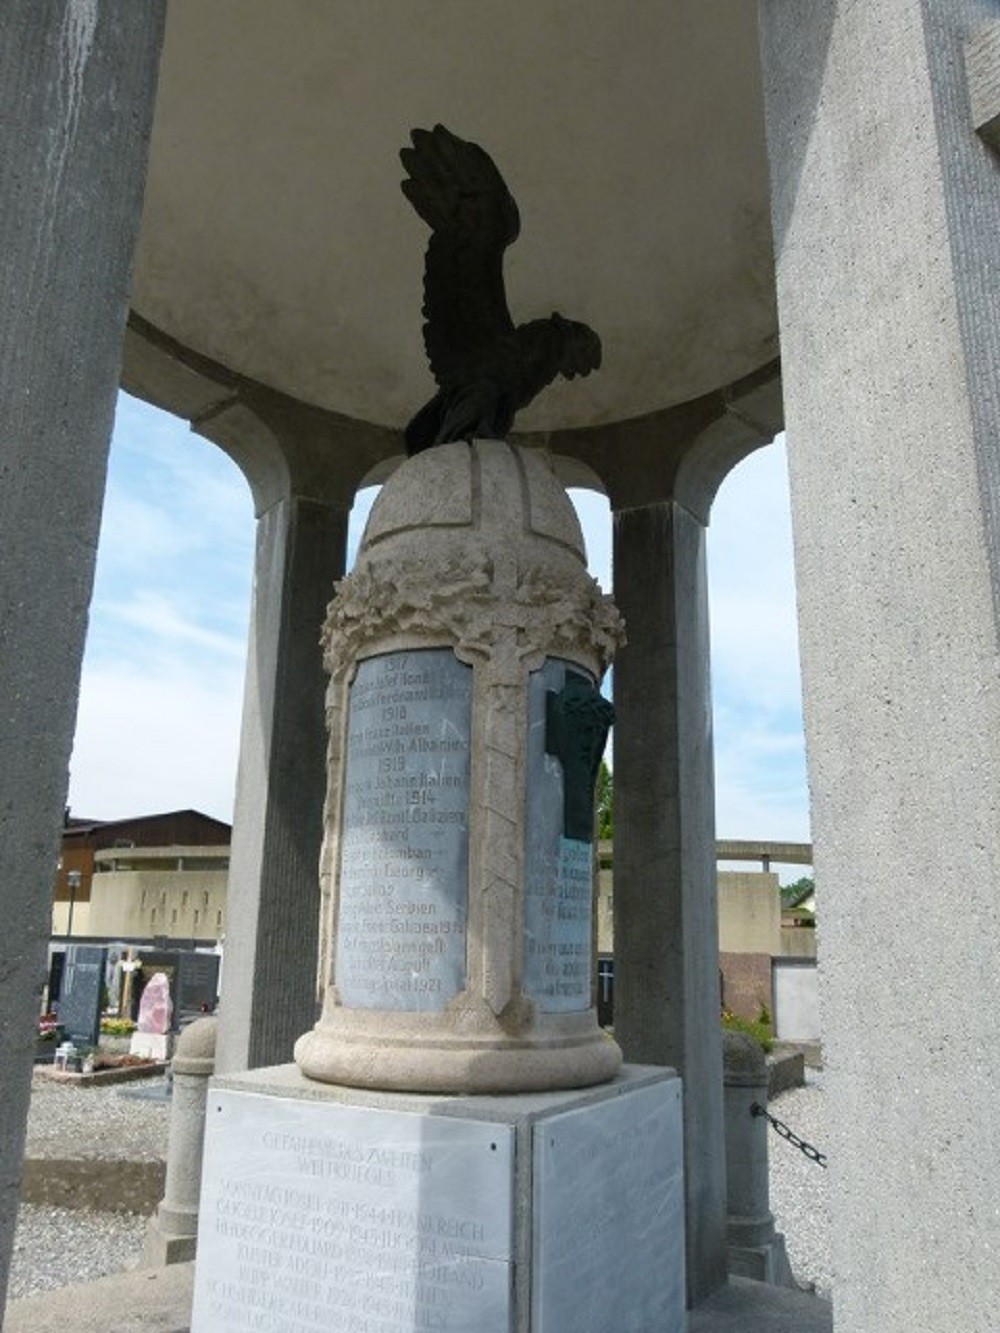 Memorial To Sons Of Fussach Who Died In WW I And WW II #4